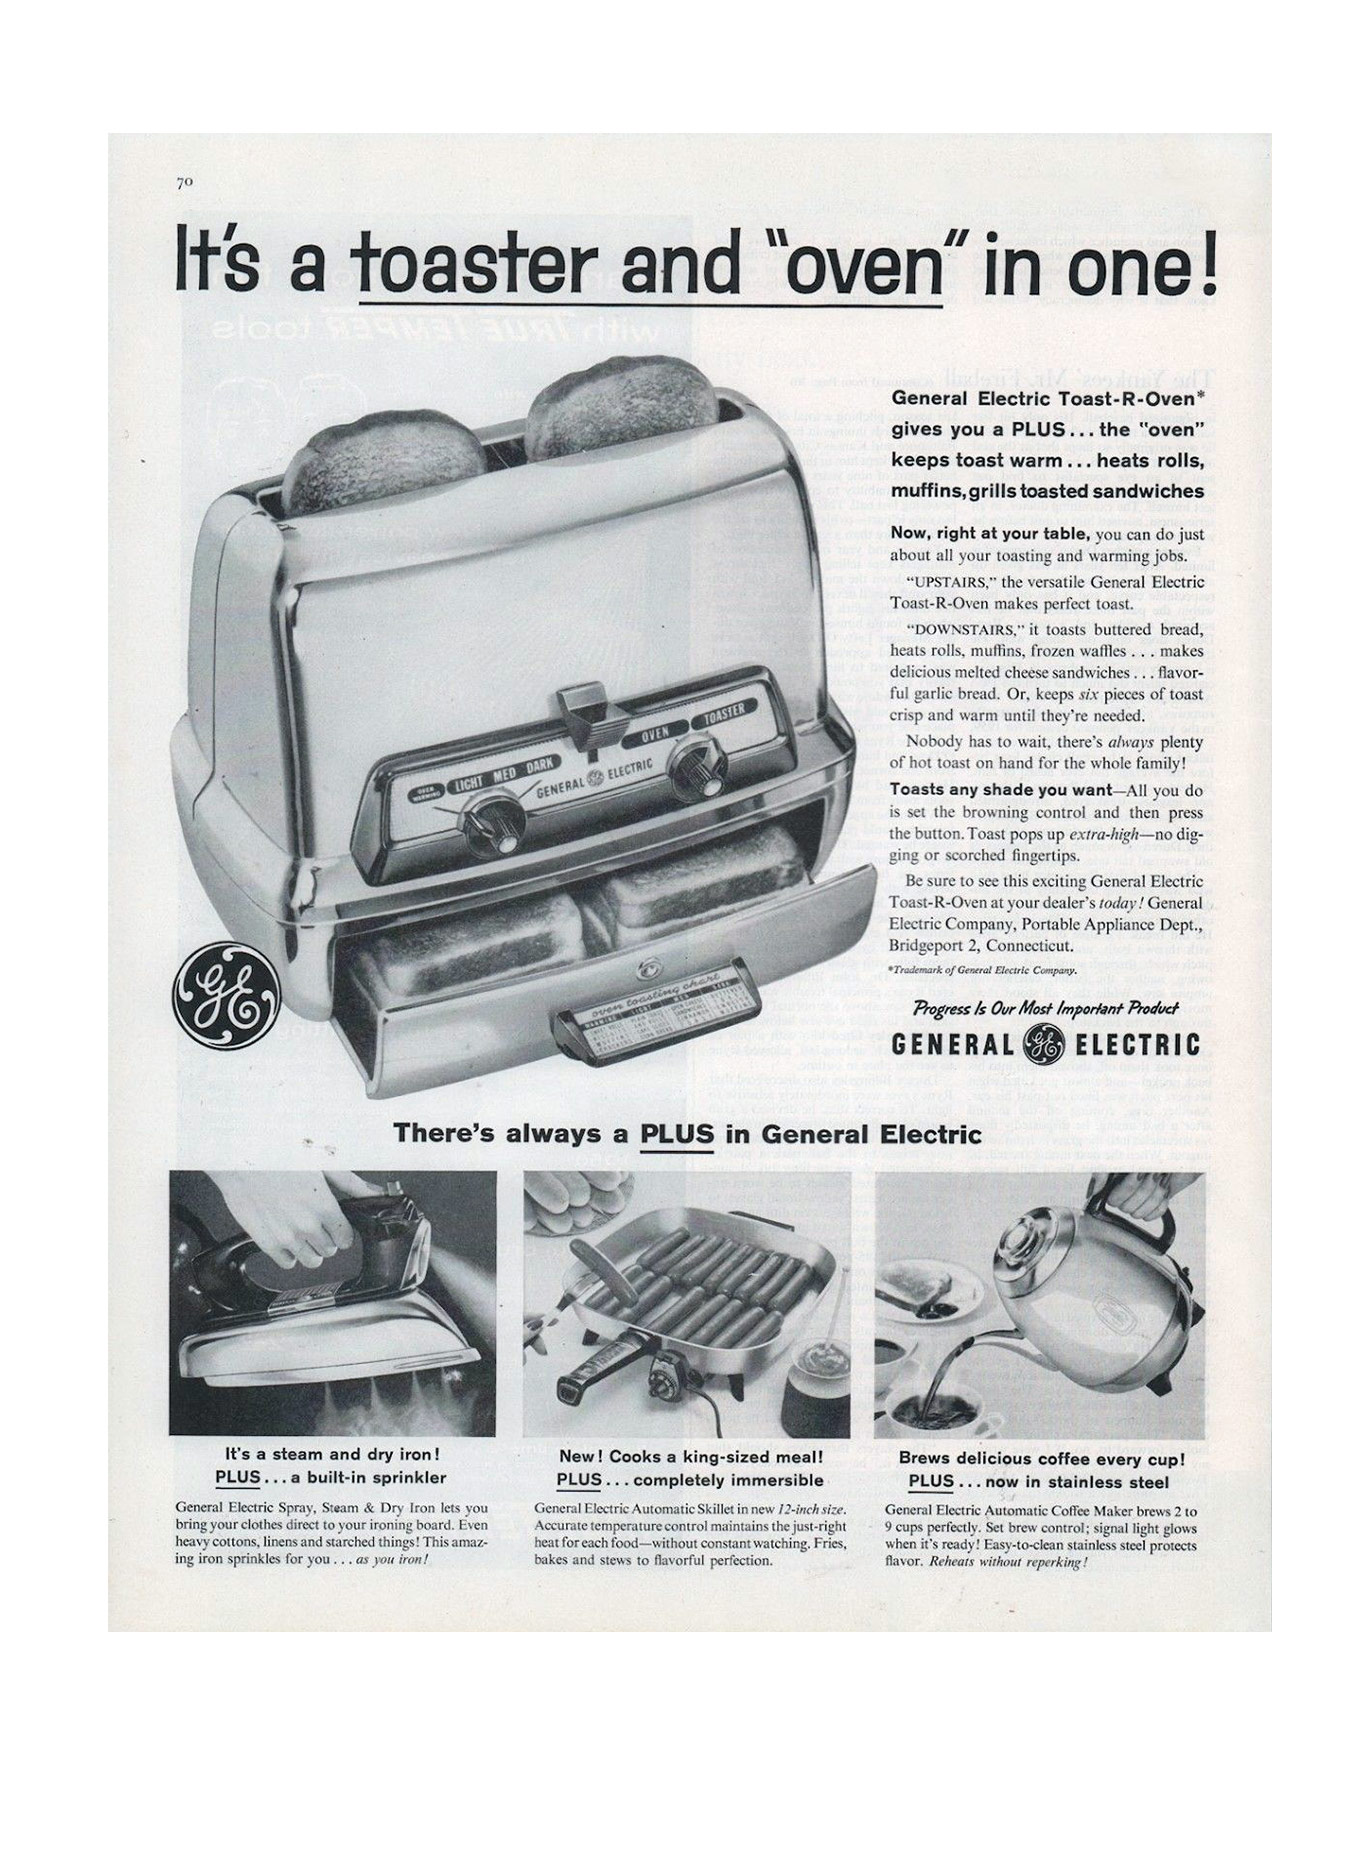 The first Toaster Oven